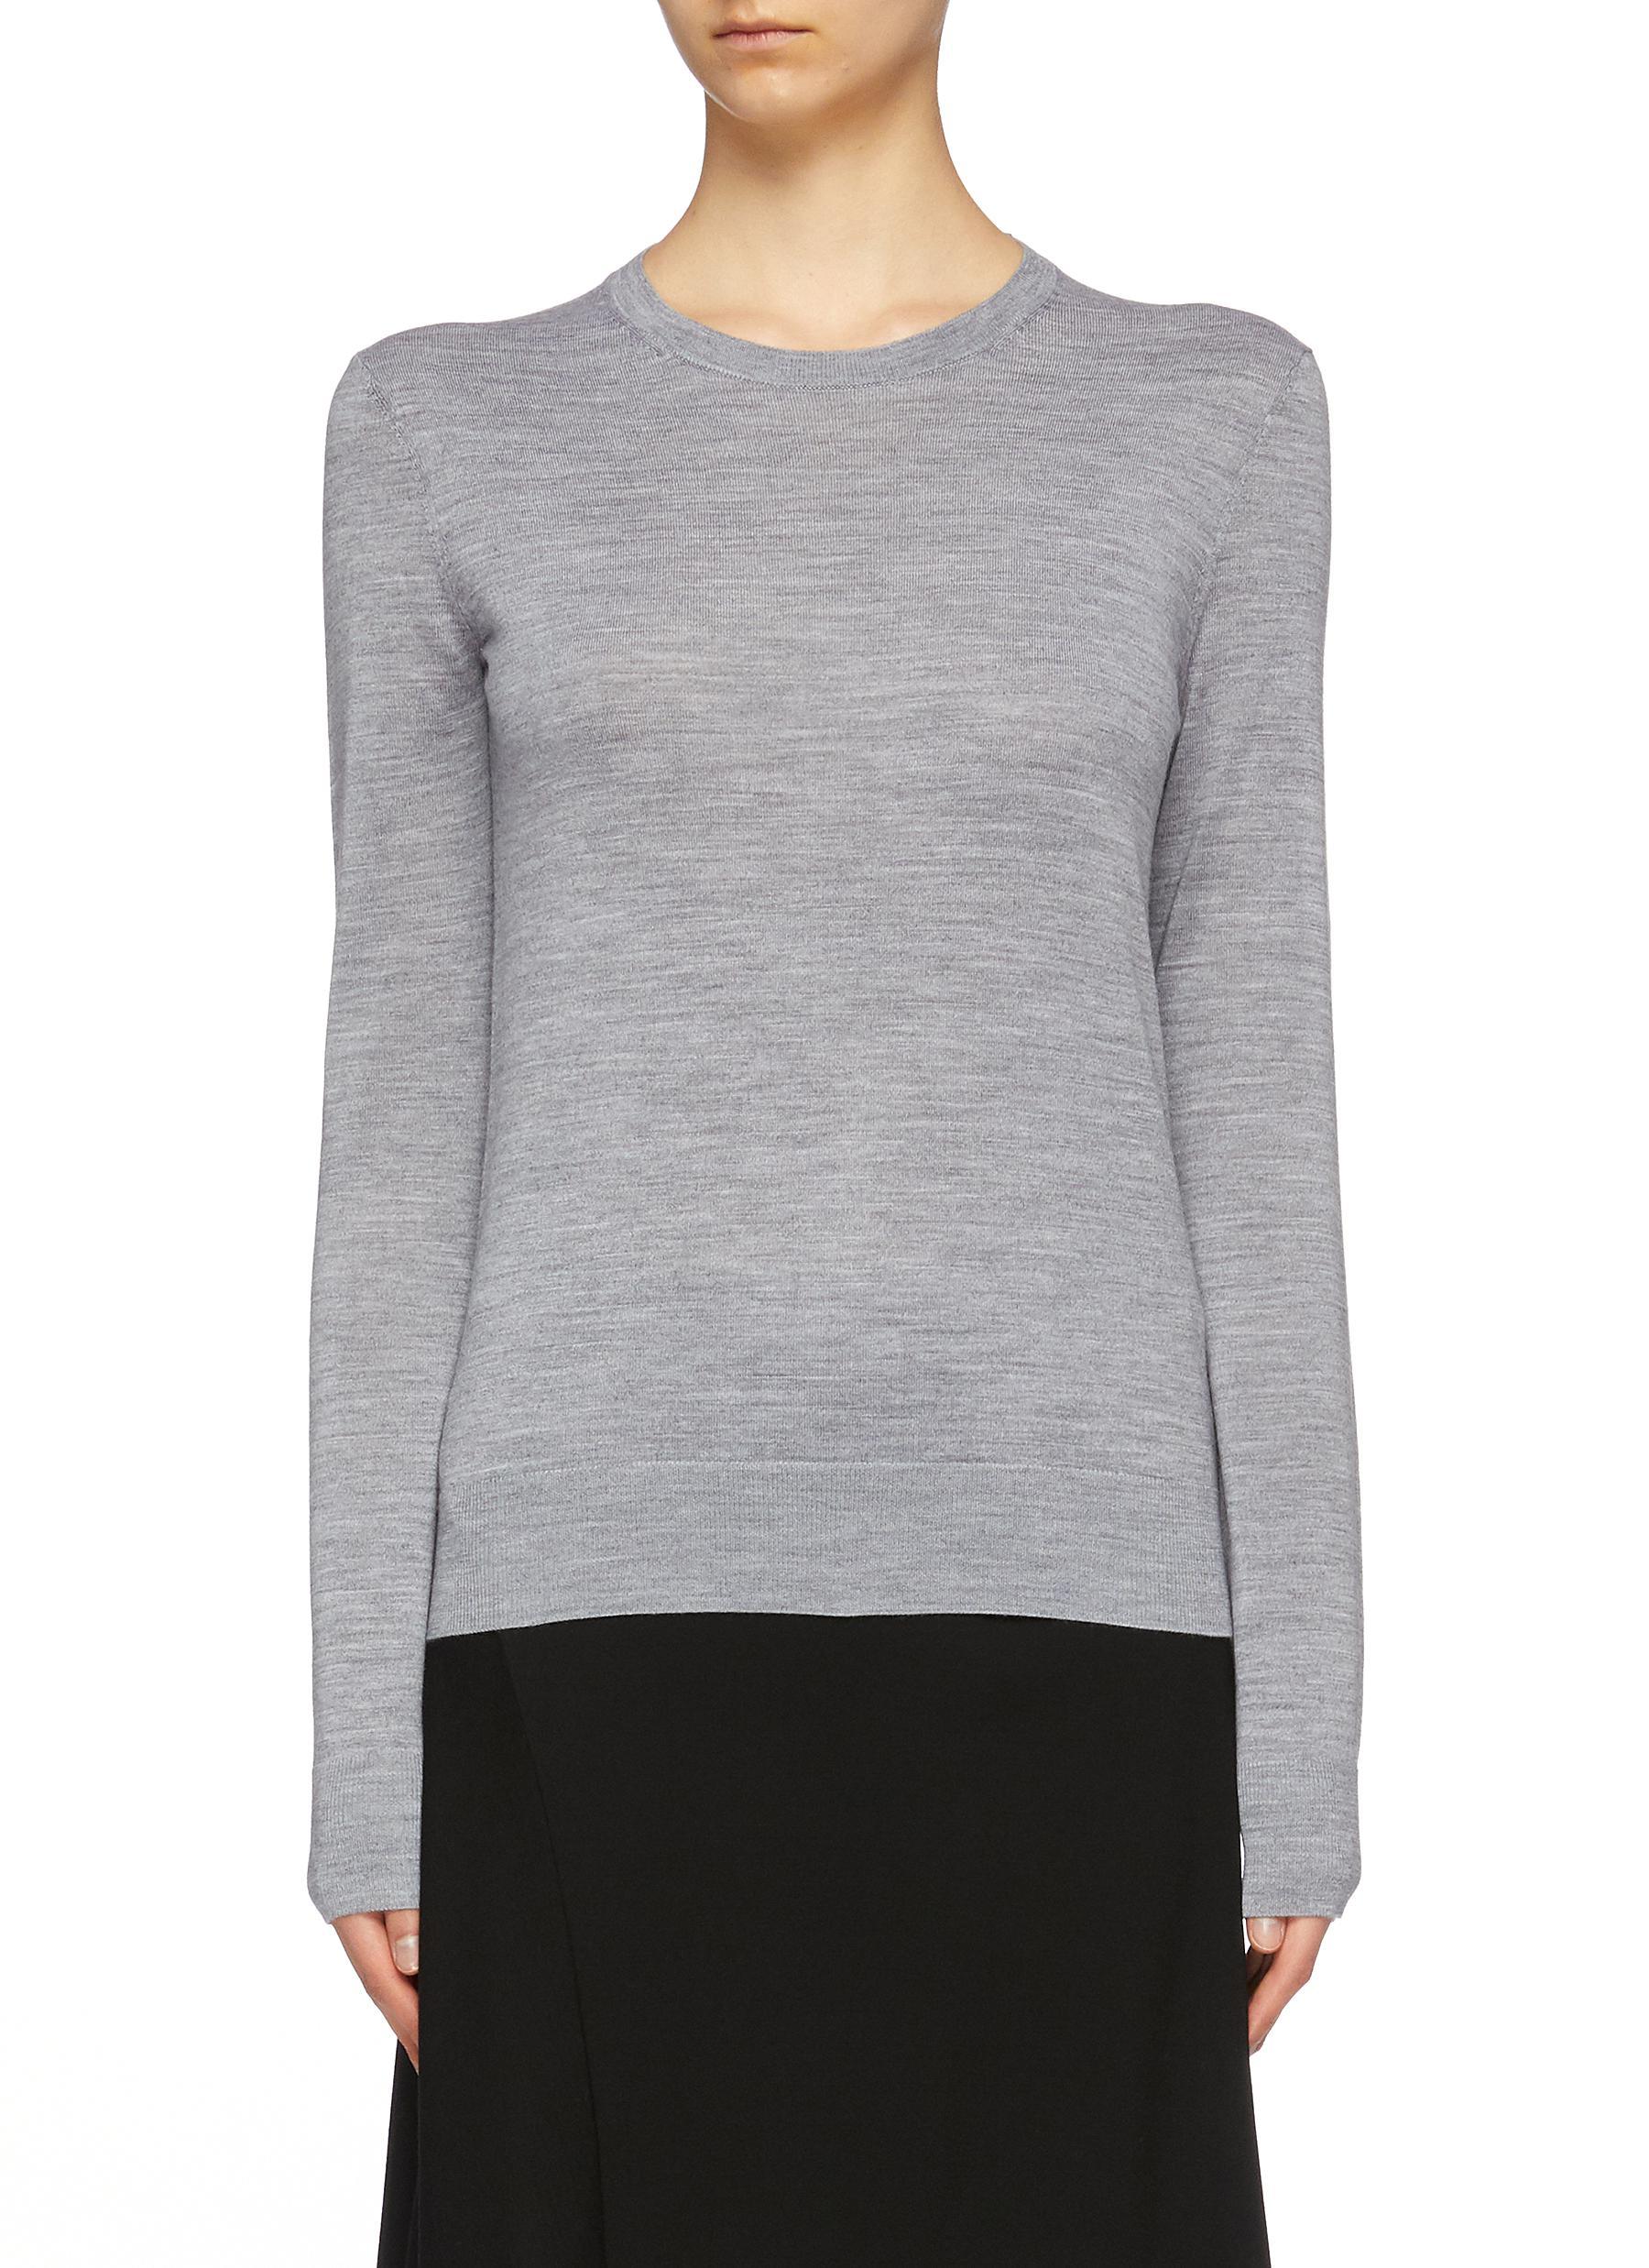 Theory Wool Blend Sweater in Grey (Gray) - Lyst